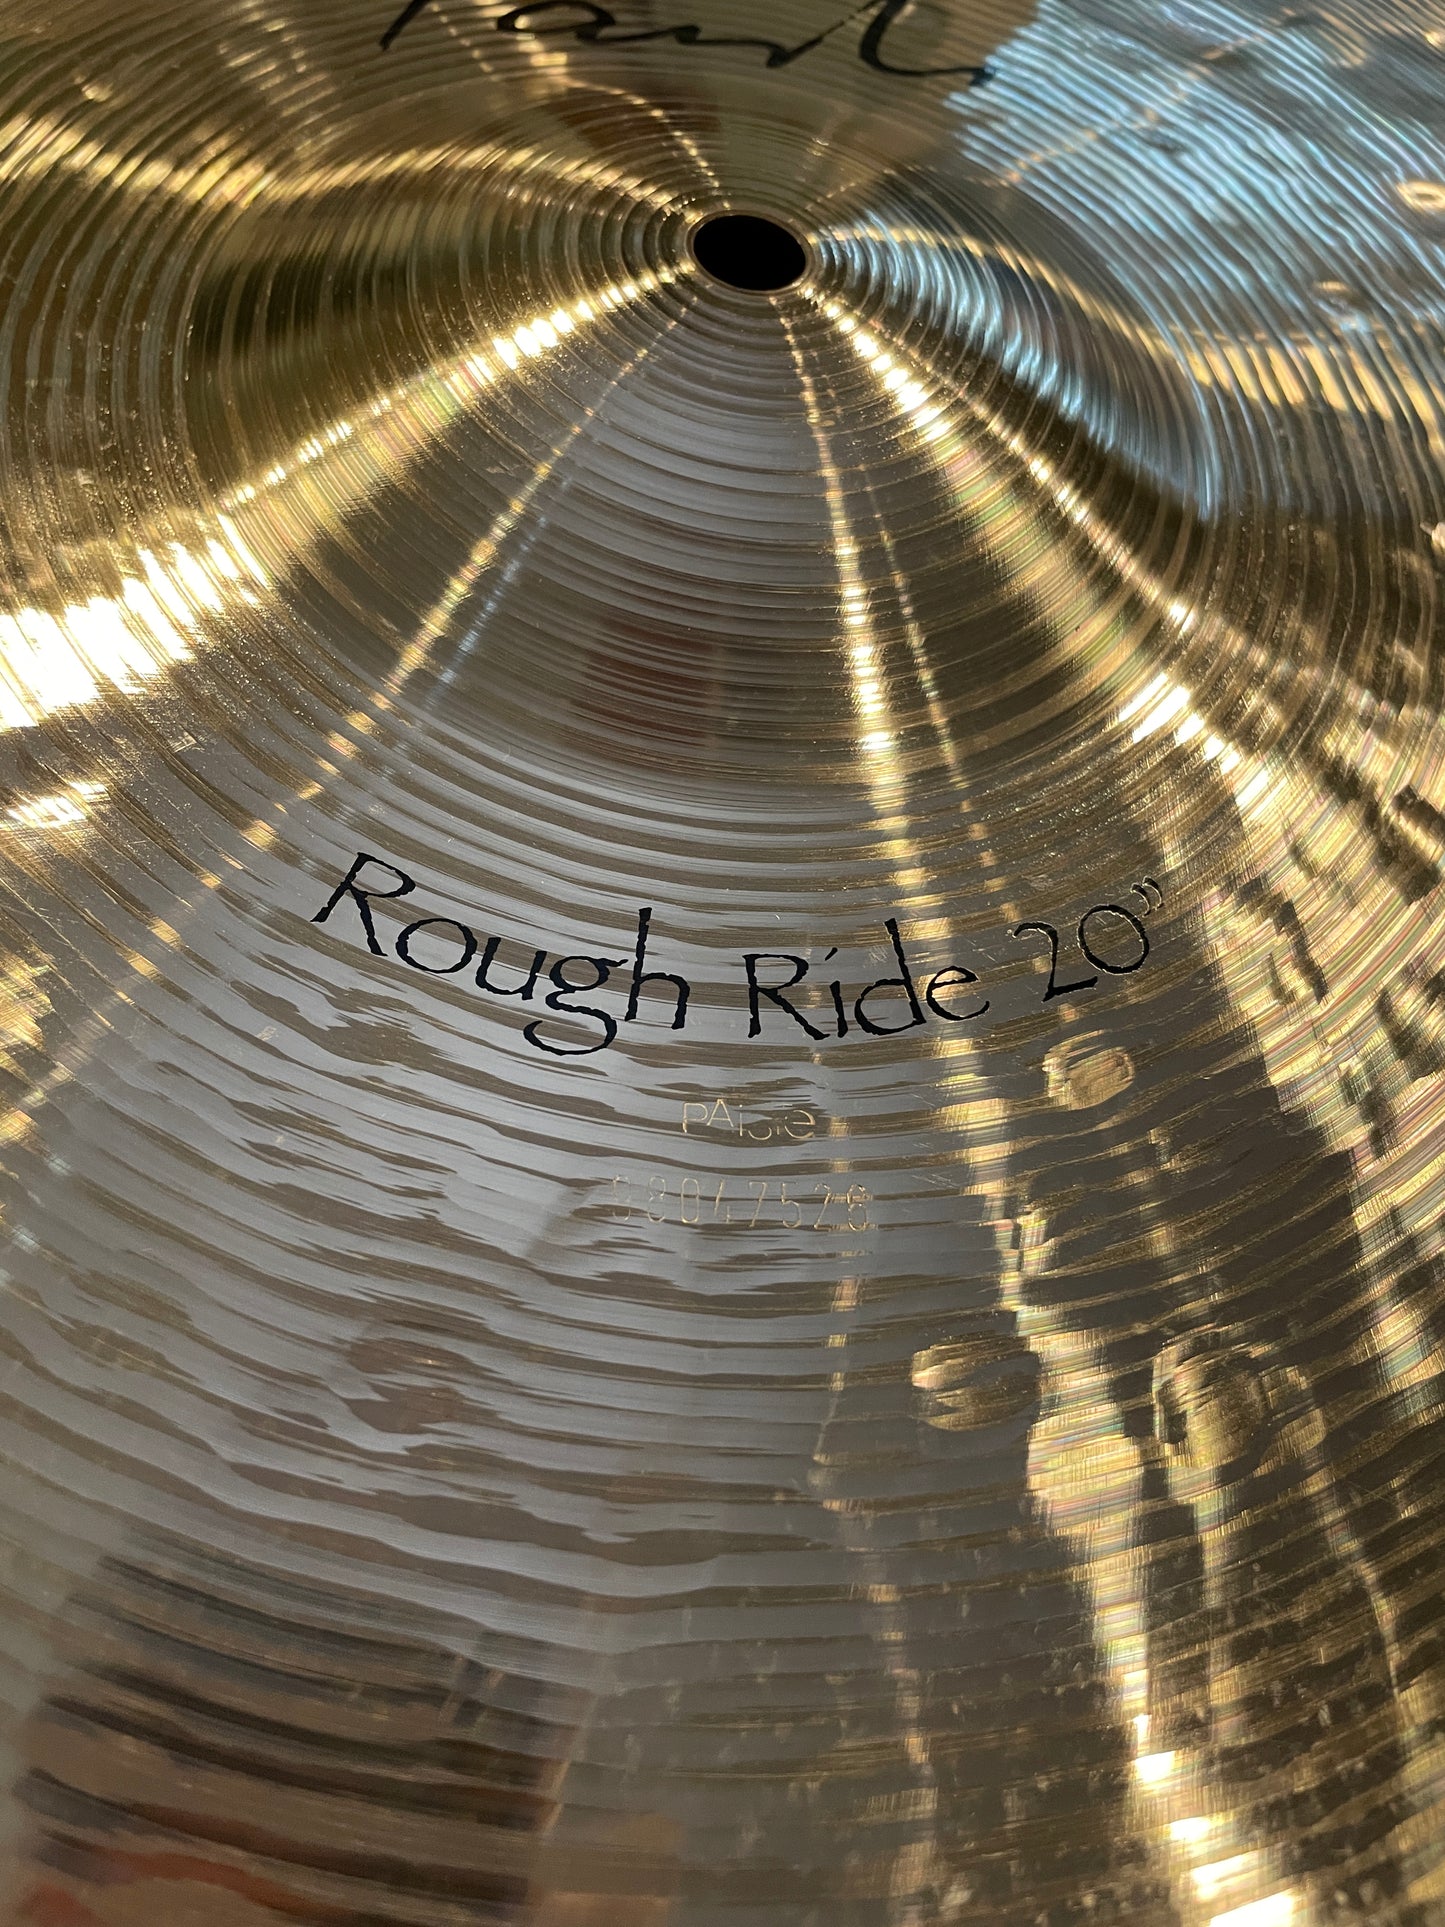 20" Paiste Signature Rough Ride Cymbal 2328g *Video Demo*